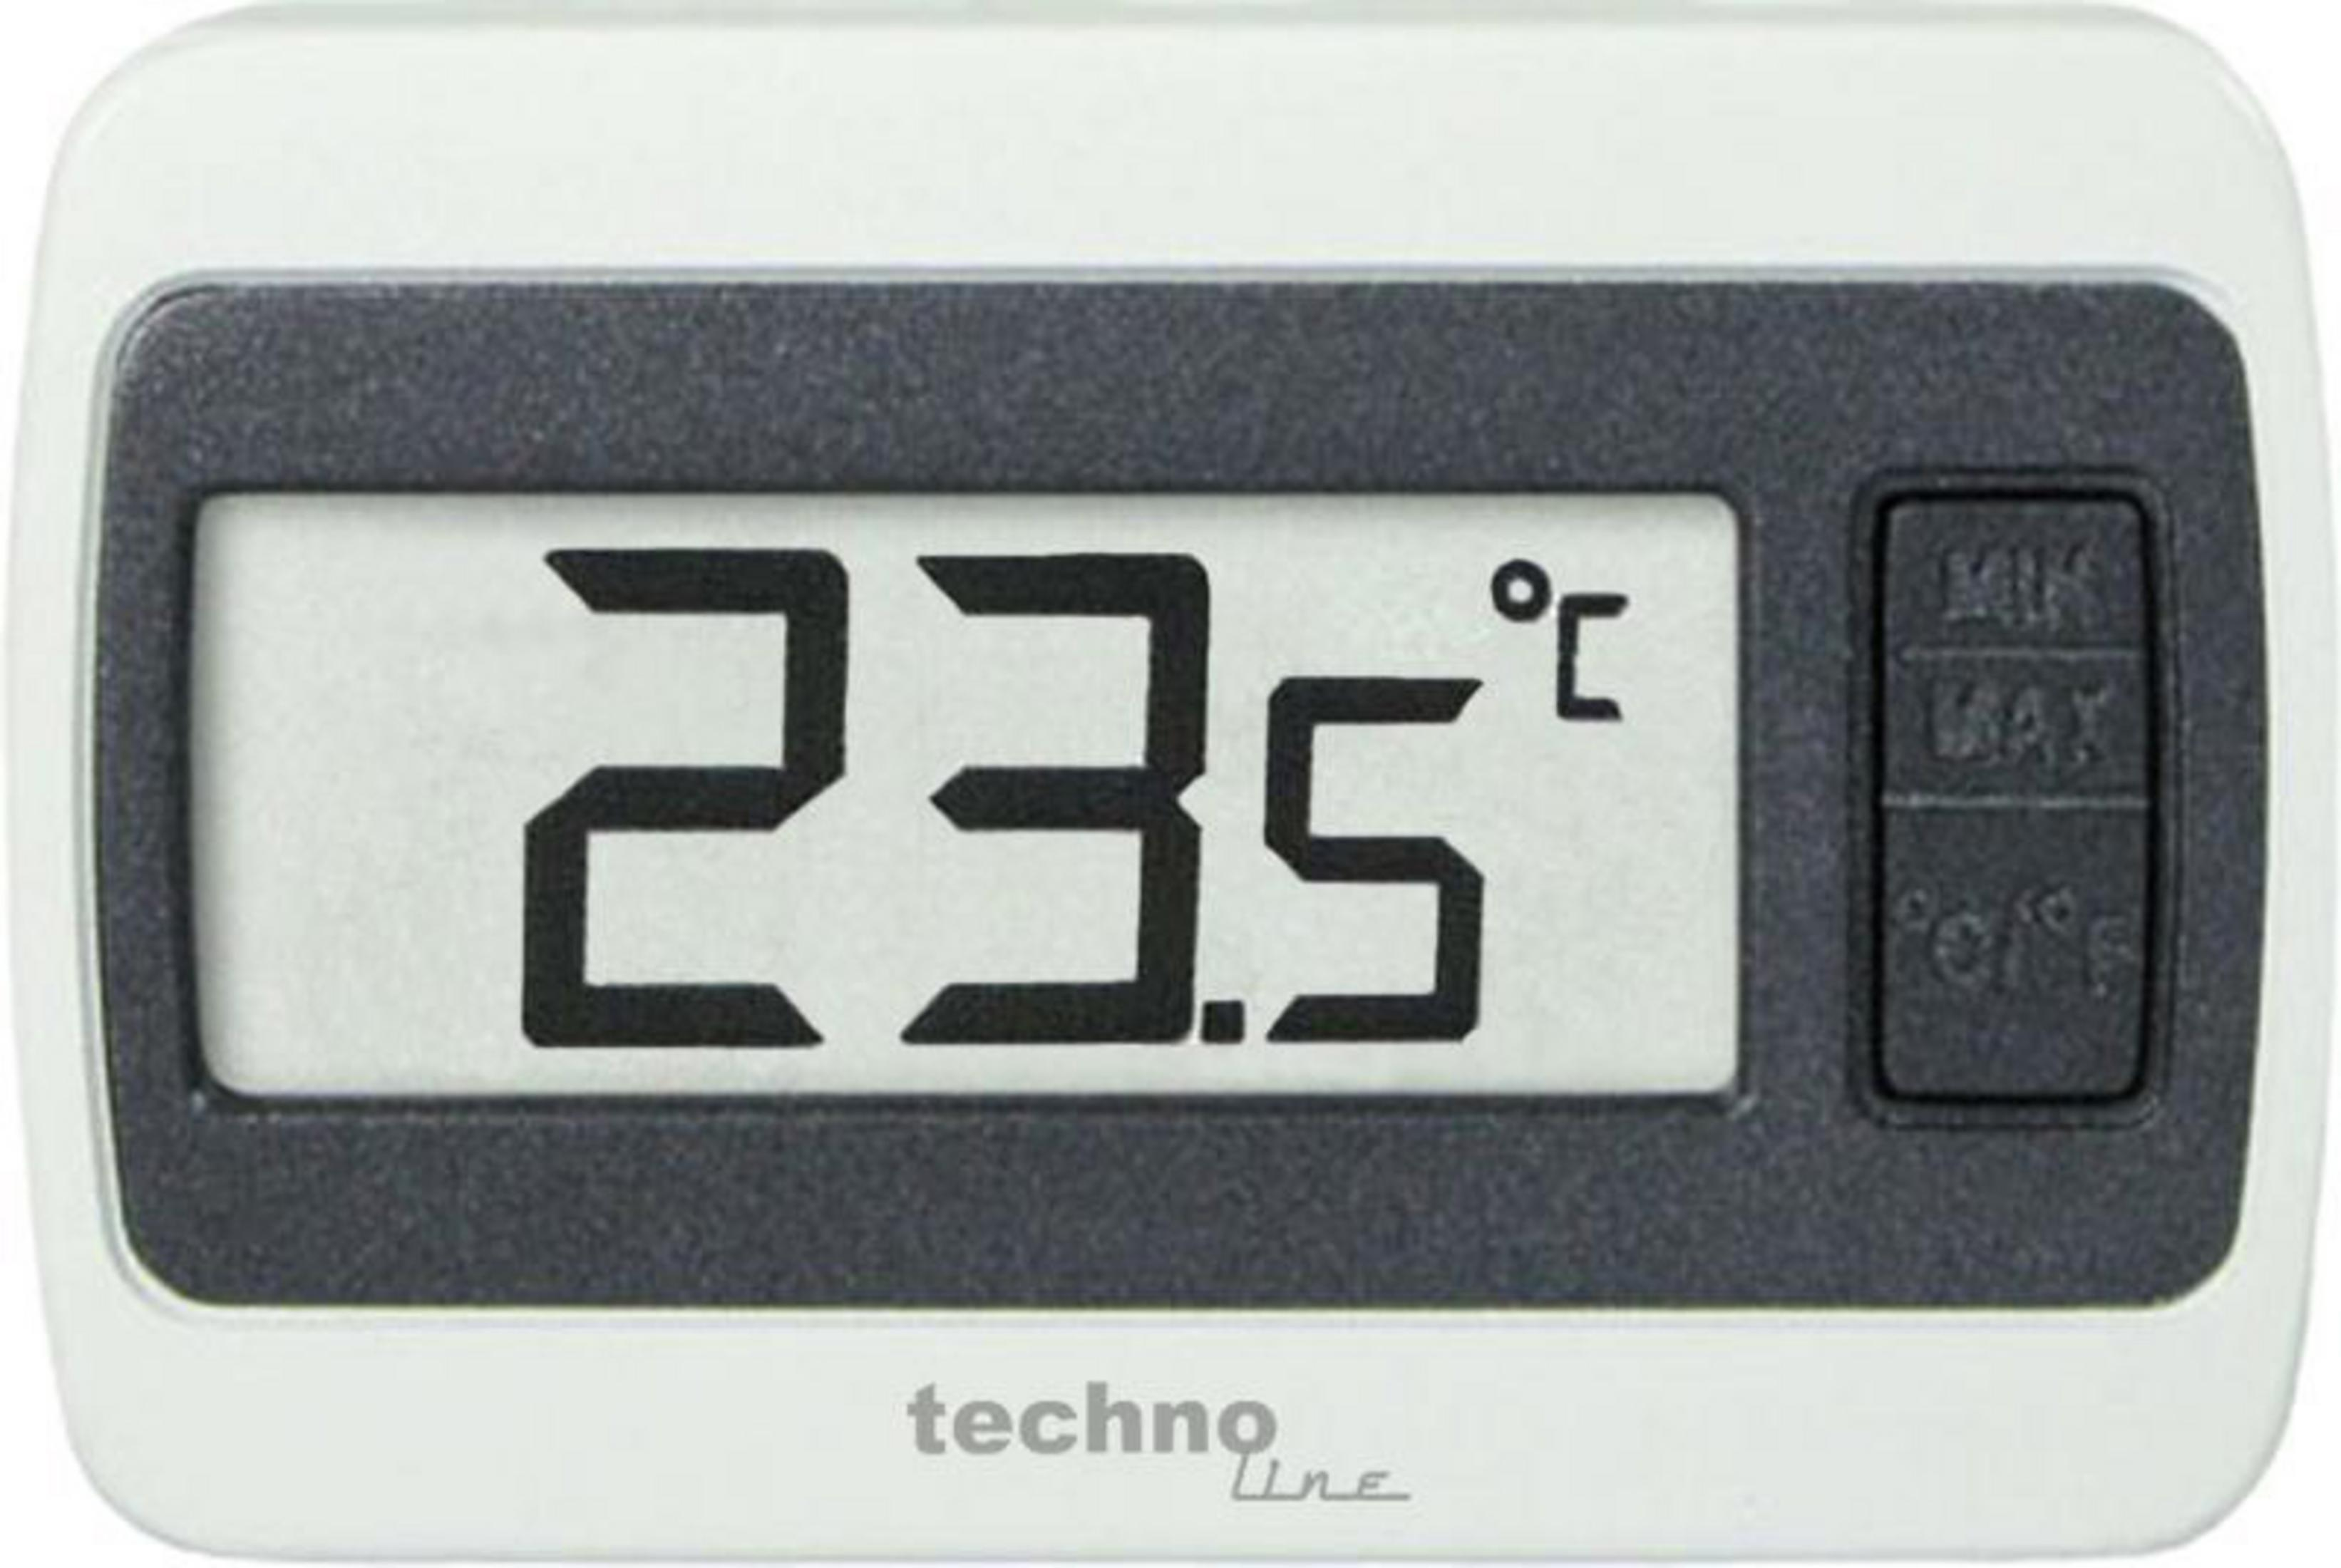 TECHNOLINE 7002 WEISS WS Thermometer